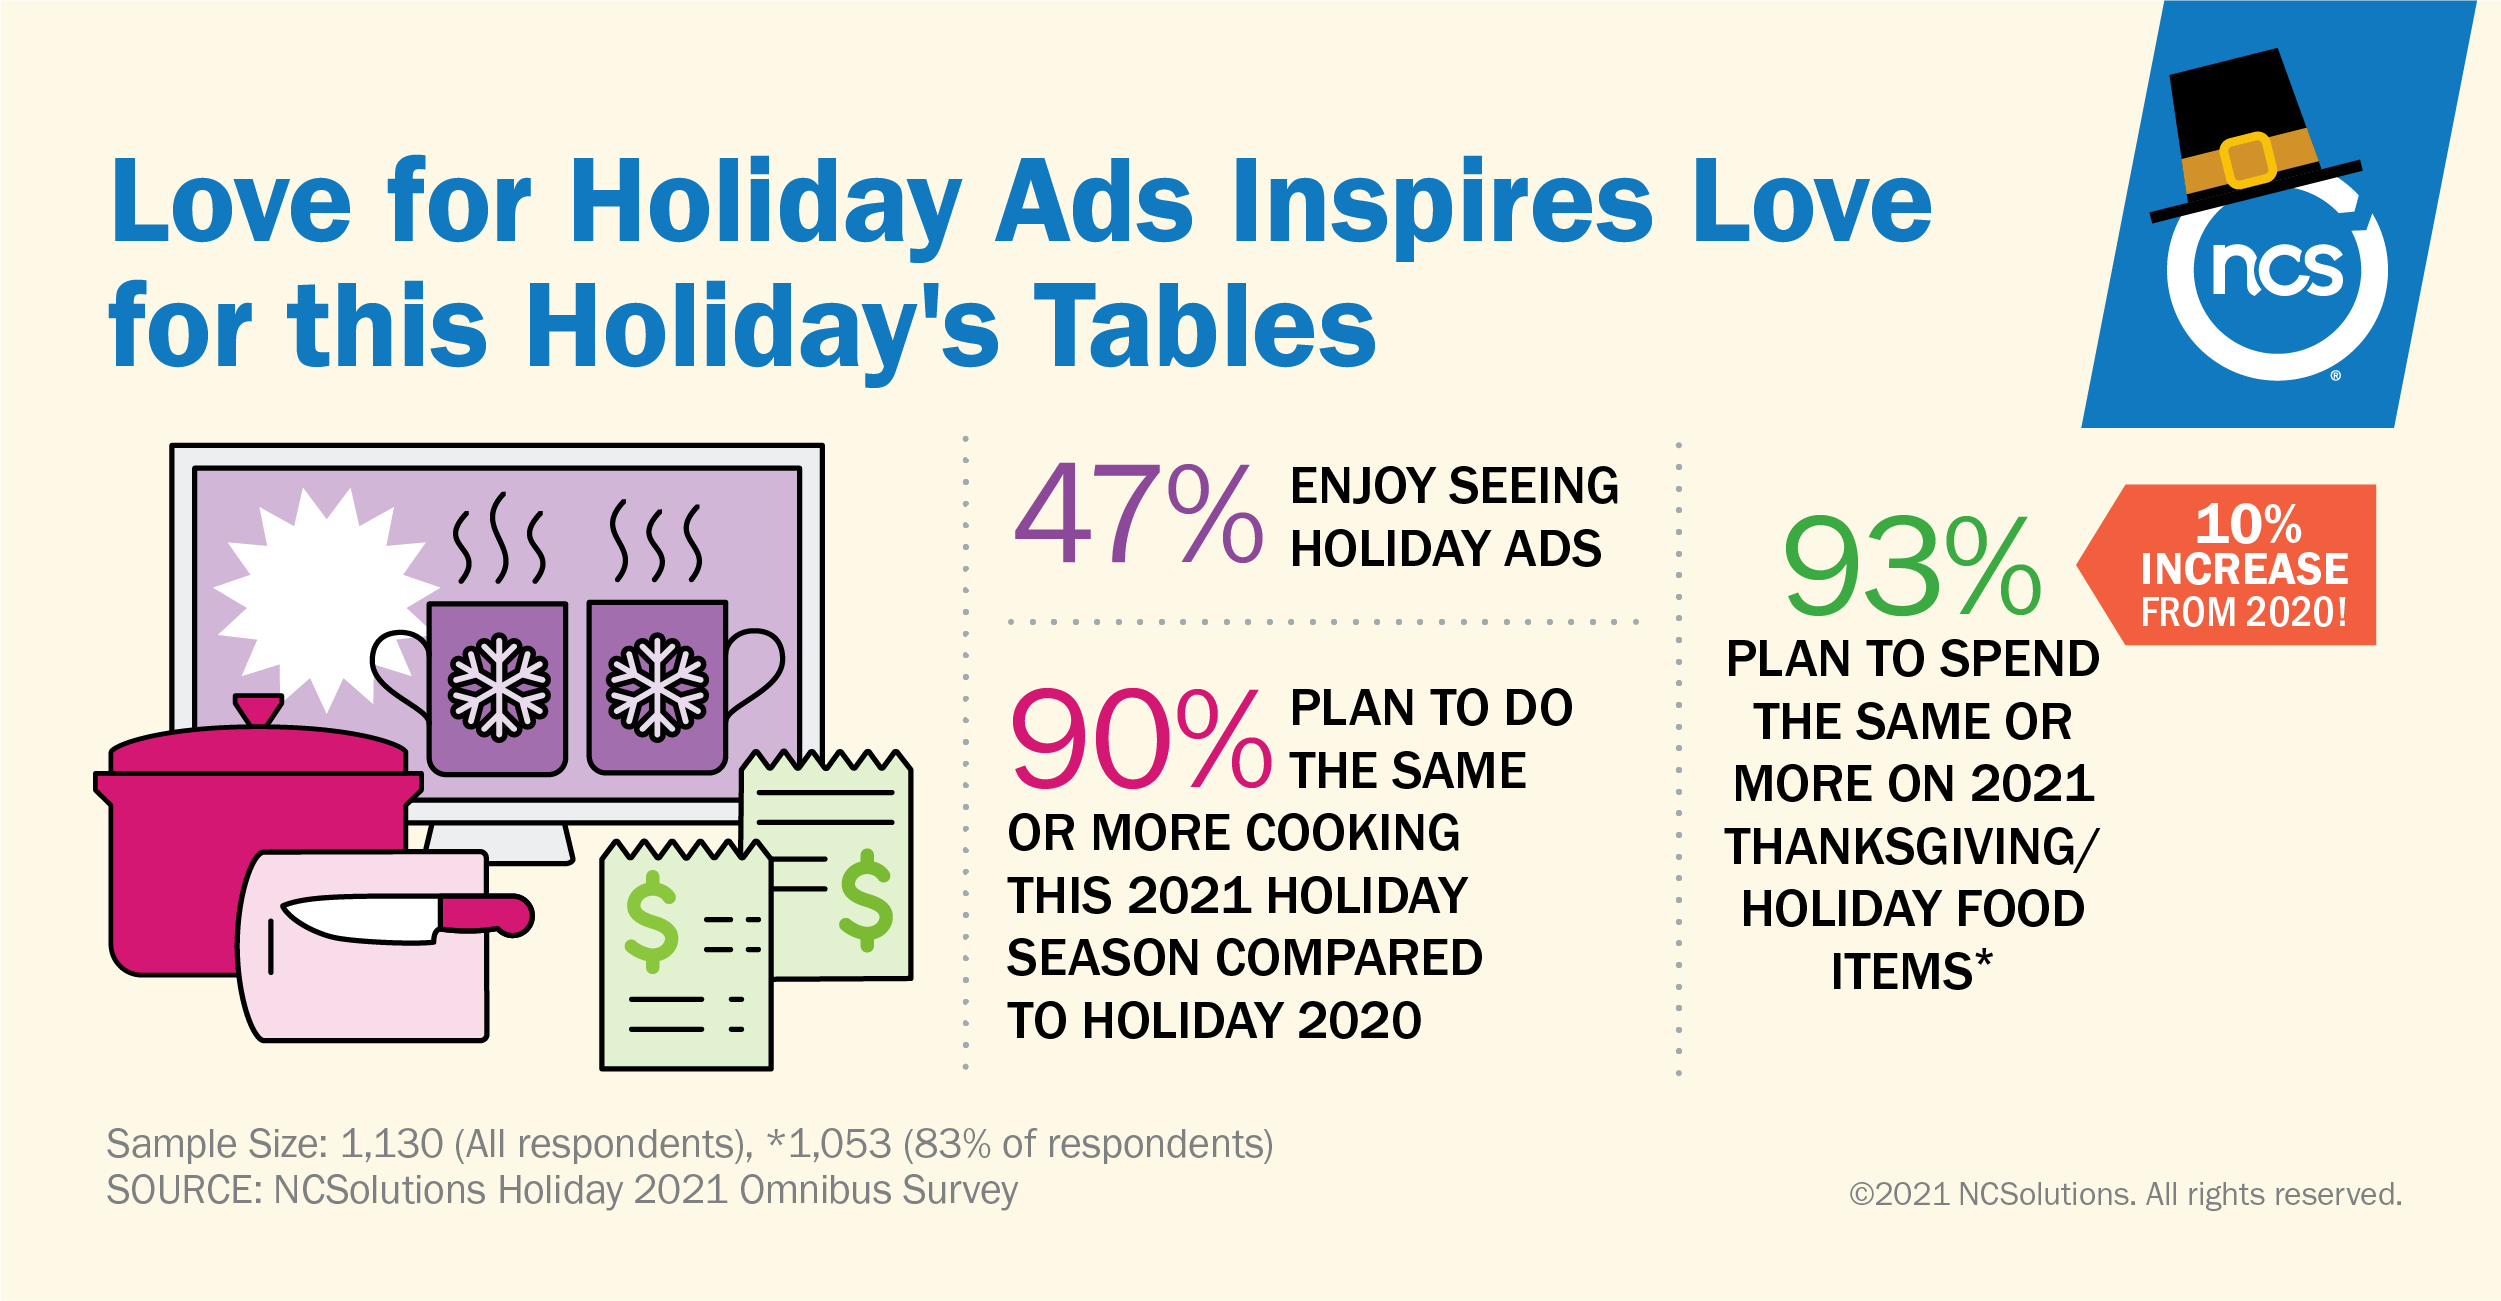 47% of Americans enjoy seeing holiday ads, and they plan to cook and spend more in Holiday 2021